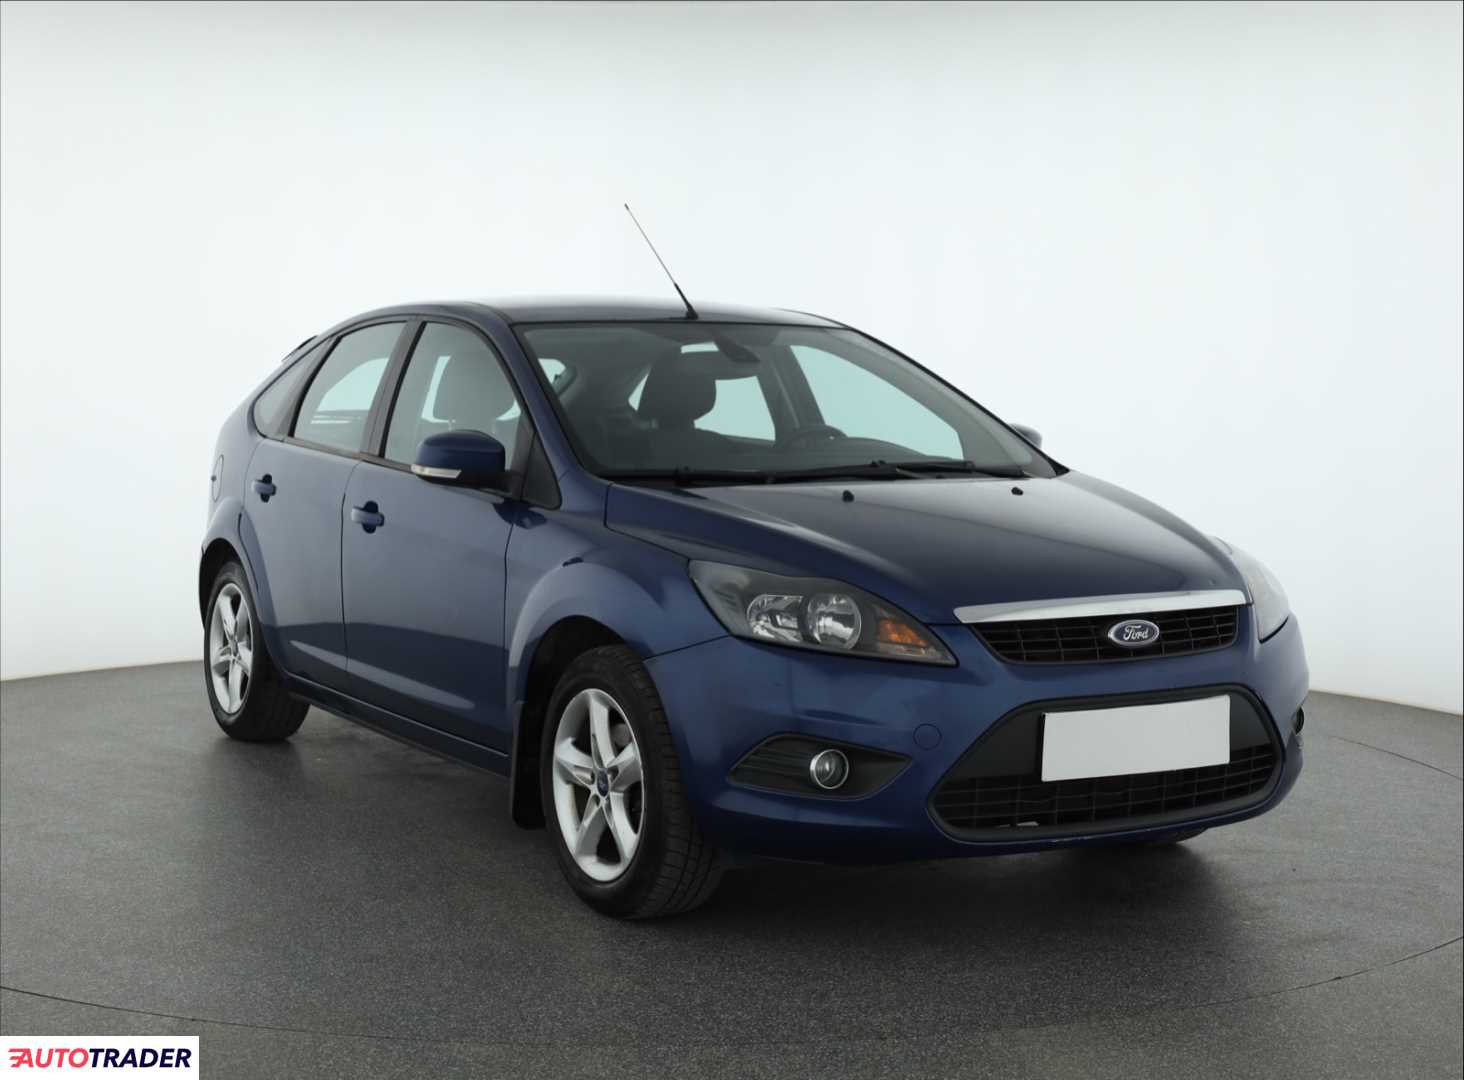 Ford Focus 2009 1.6 99 KM